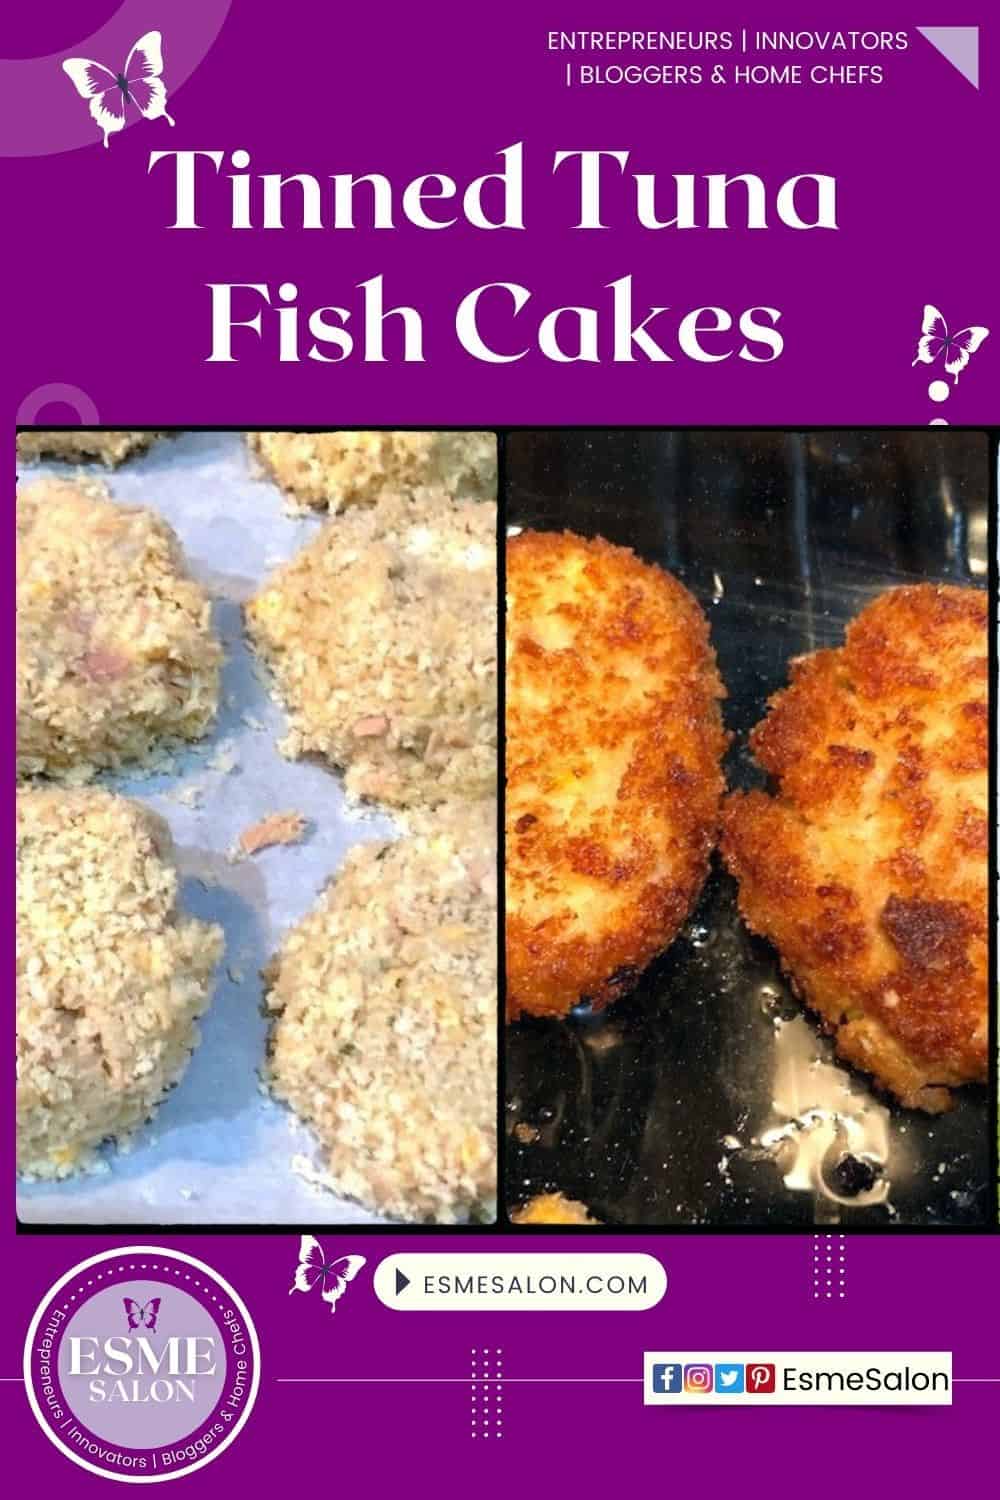 Tinned Tuna Fish Cakes with mashed potato and lots of cheese